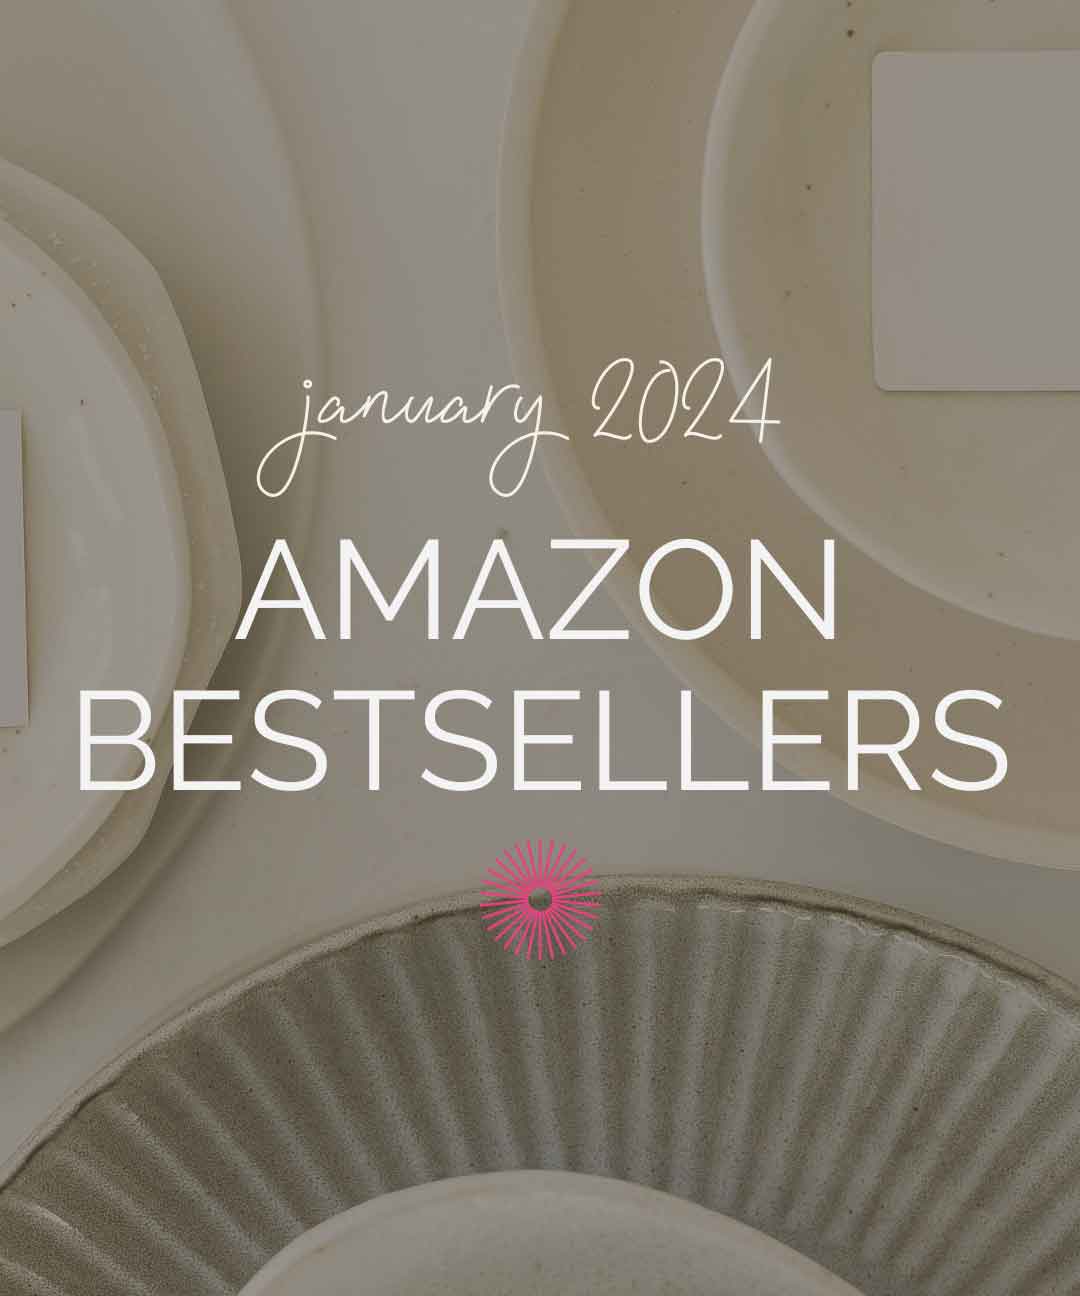 Beige plates in the background with text overlay: "January 2024 Amazon Bestsellers".